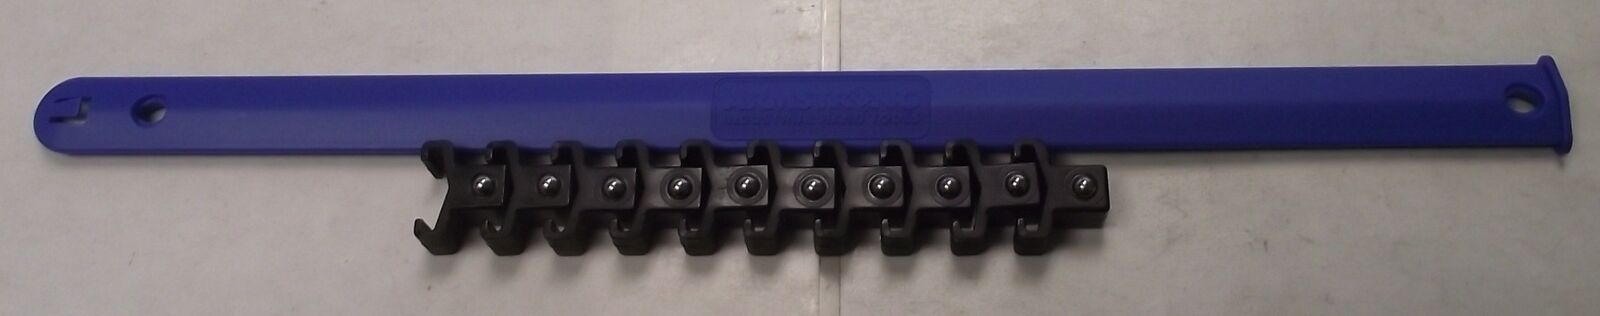 Armstrong 16-839 1/2" Drive Socket Rail Blue 15" 10 Positions USA